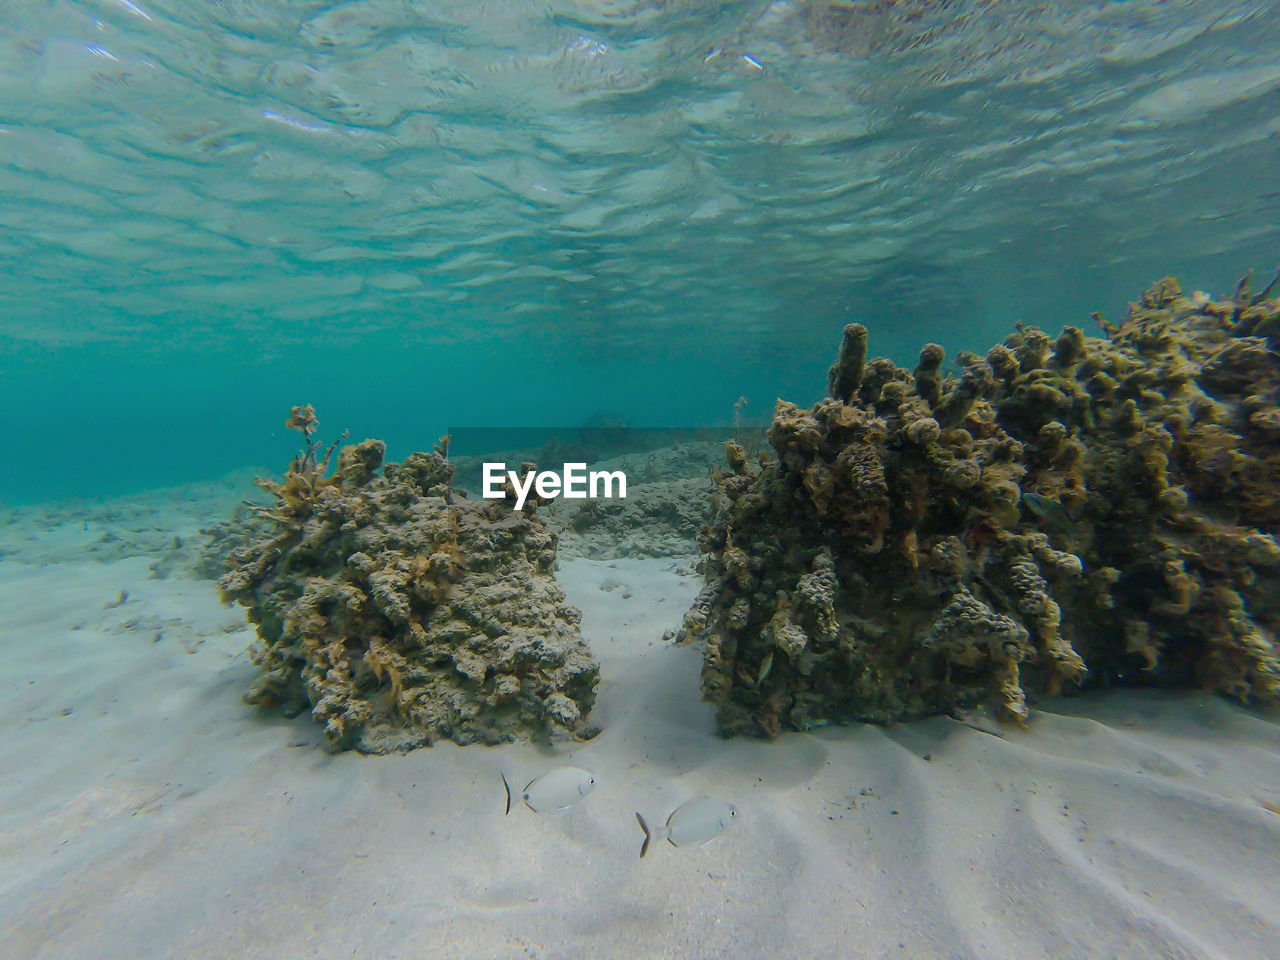 VIEW OF SEA AND CORAL IN WATER